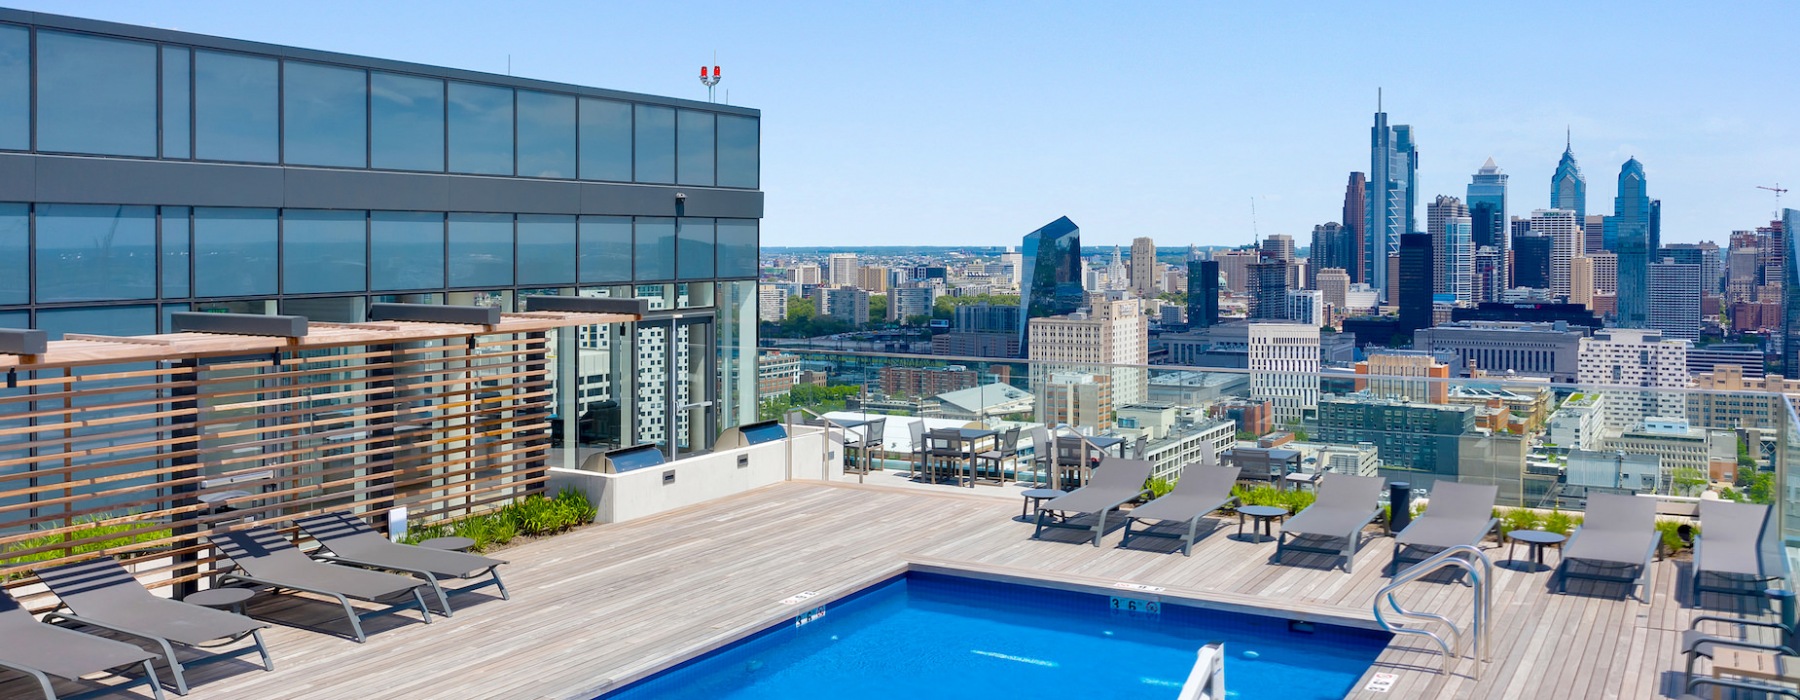 rooftop pool, lounge and grill area